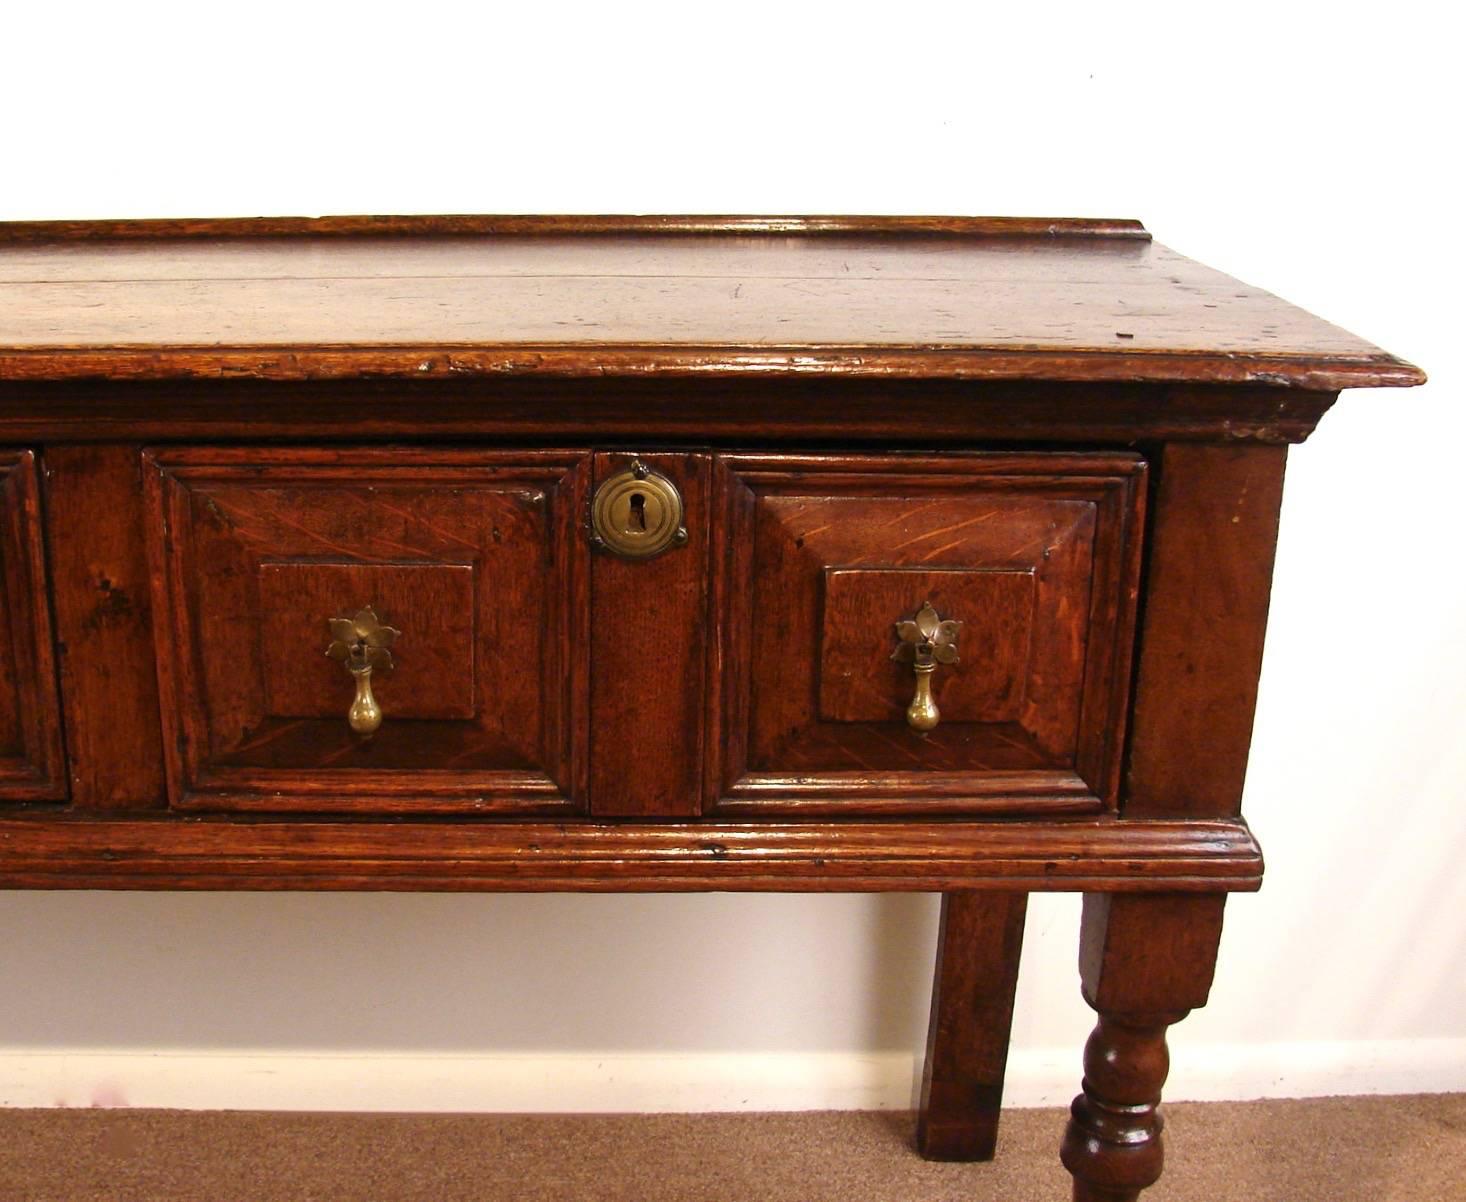 An English oak dresser base, the top with a moulded edge above three fitted panel front drawers raised on turned front and stile rear legs, circa 1680 and later.
Raised in height, two drawers relined.